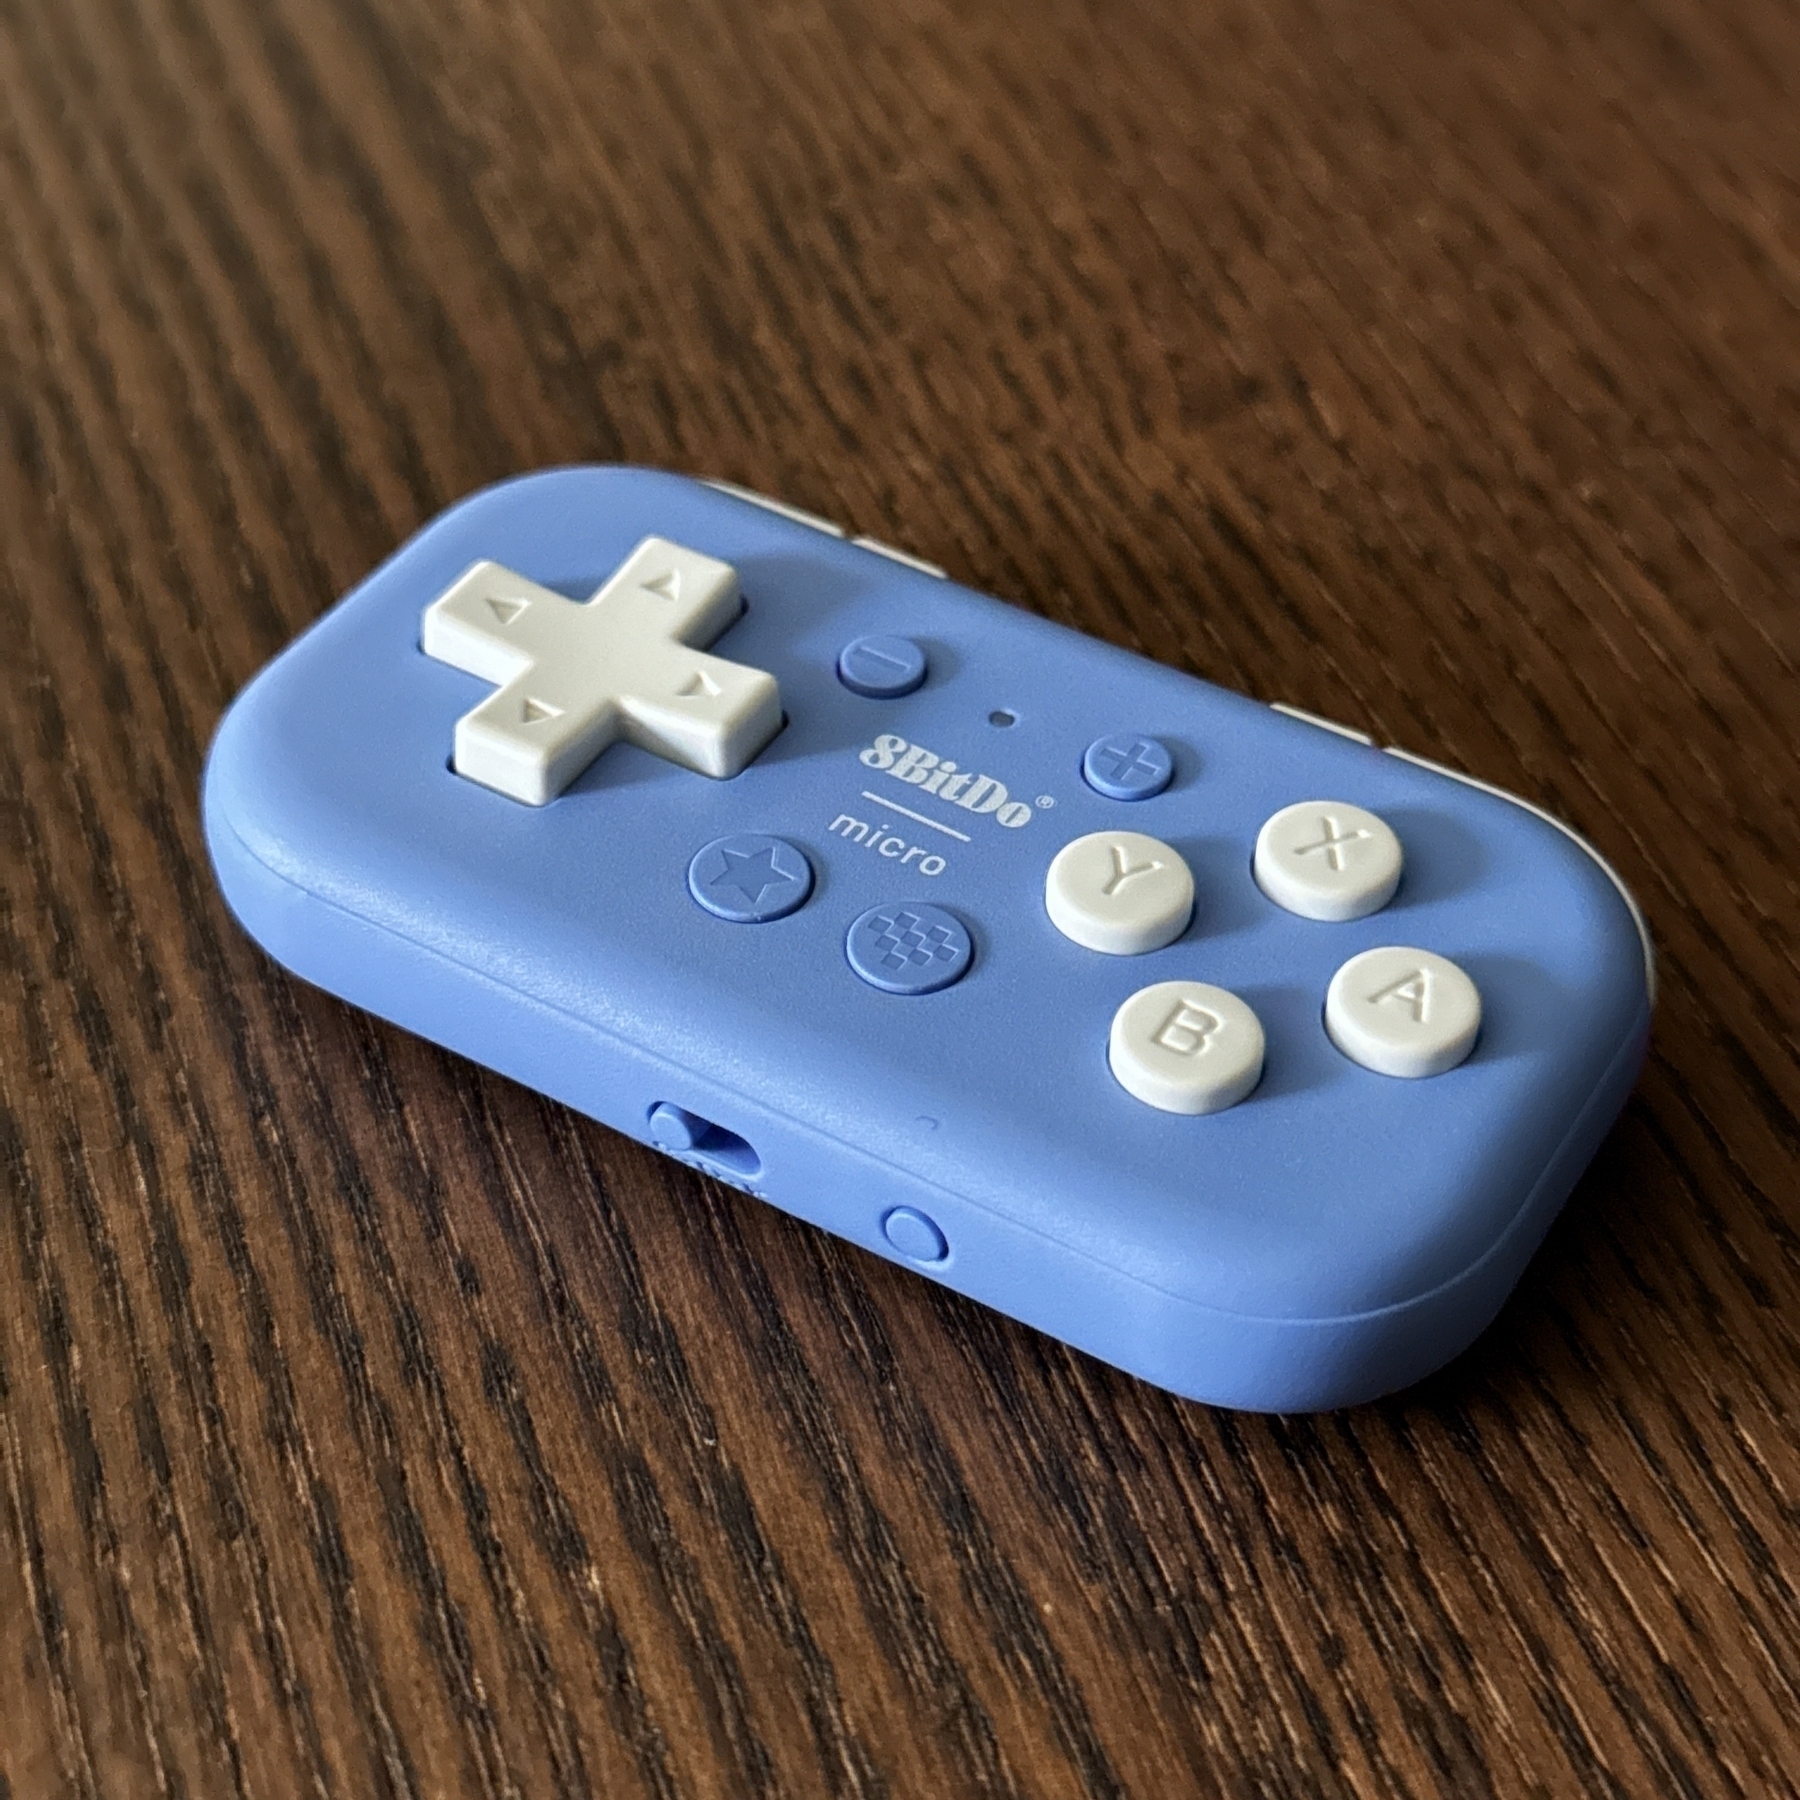 A small rectangular controller in a shade of purple-blue sitting on a dark wooden surface